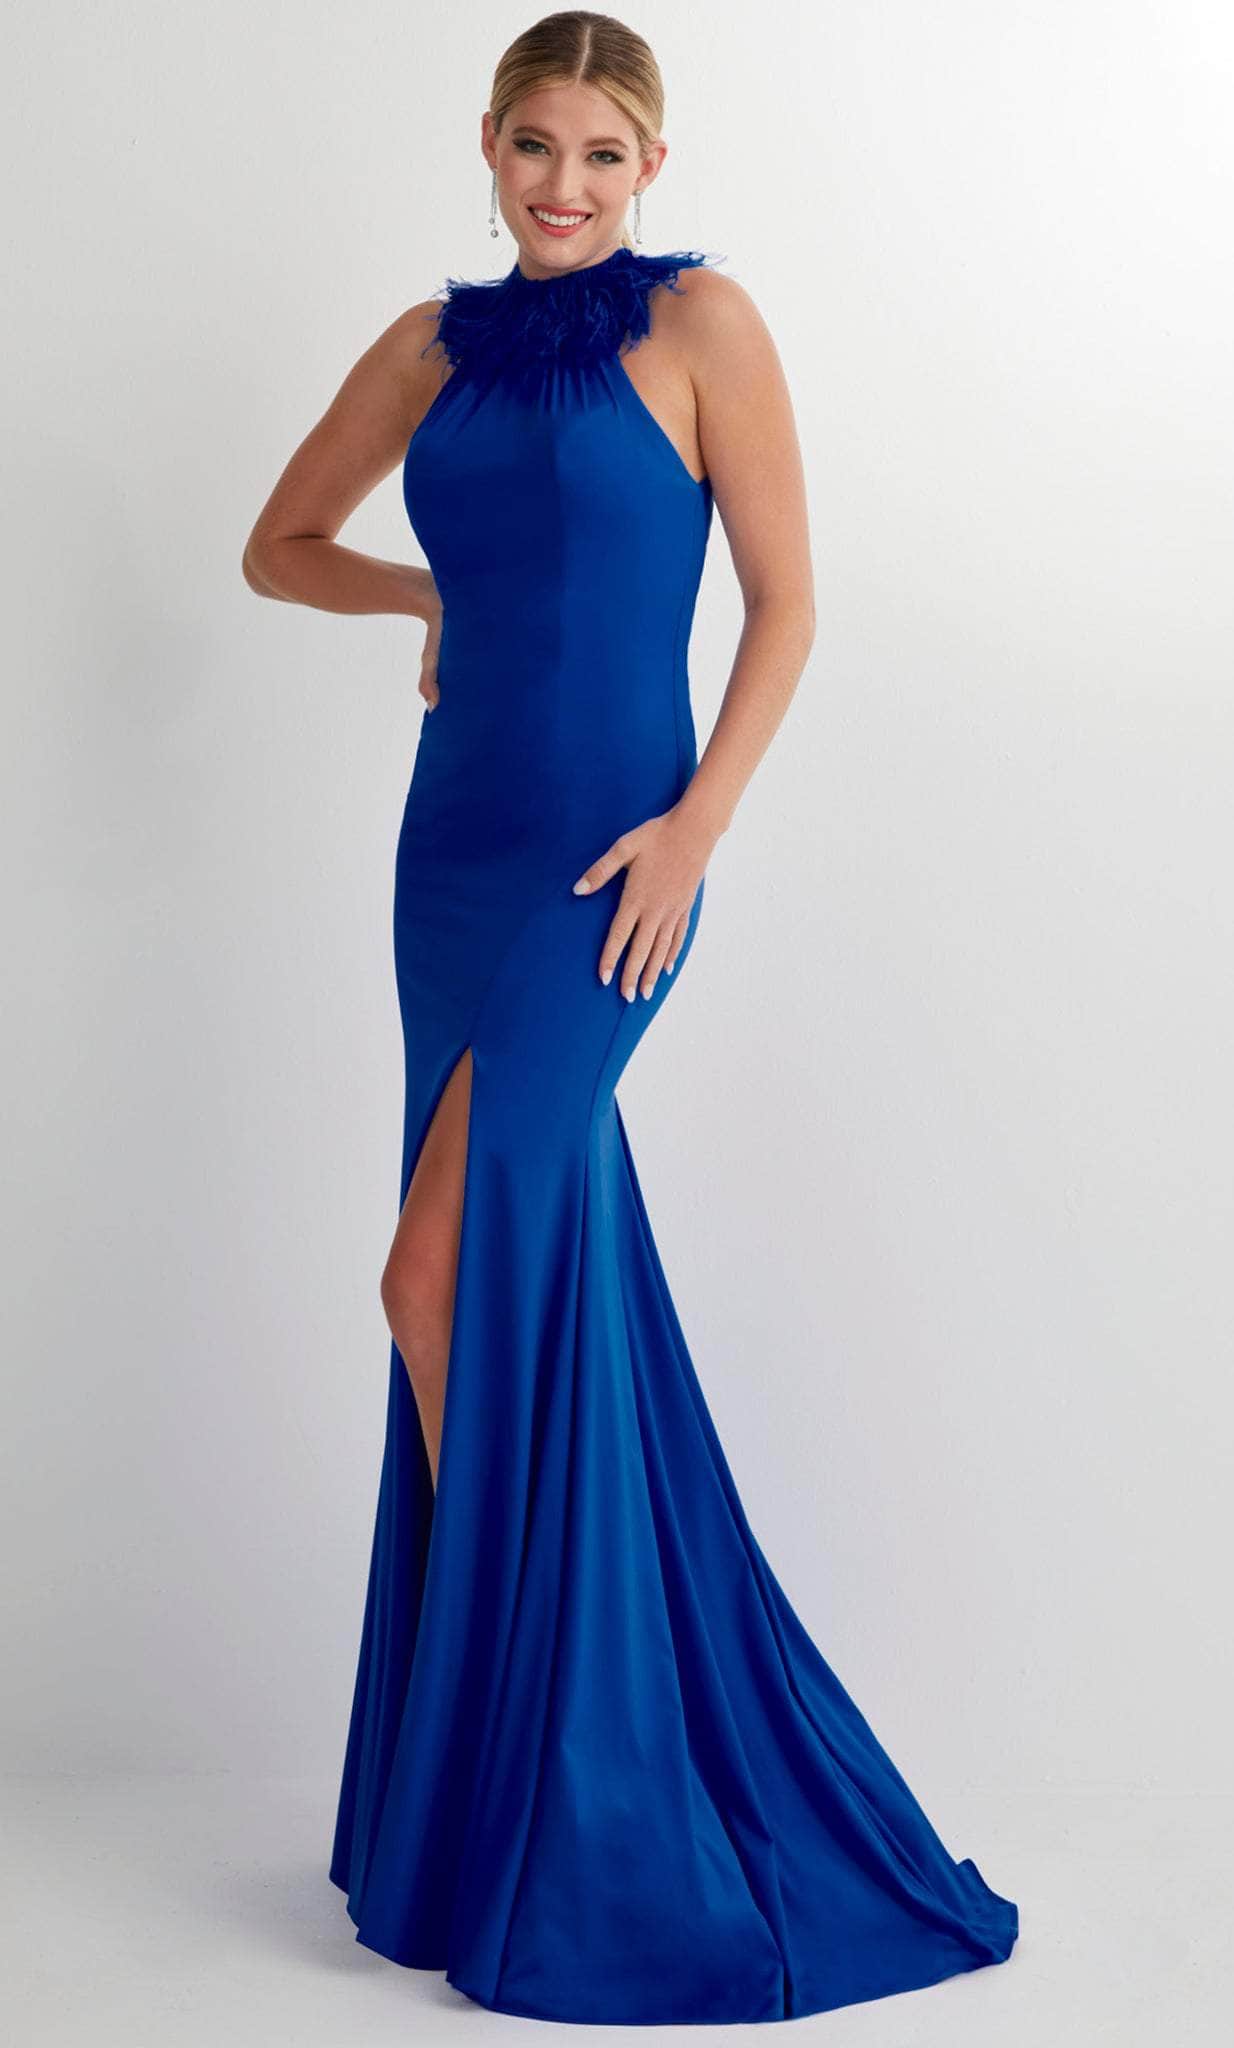 Image of Studio 17 Prom 12913 - Feathered Halter Neck Evening Gown